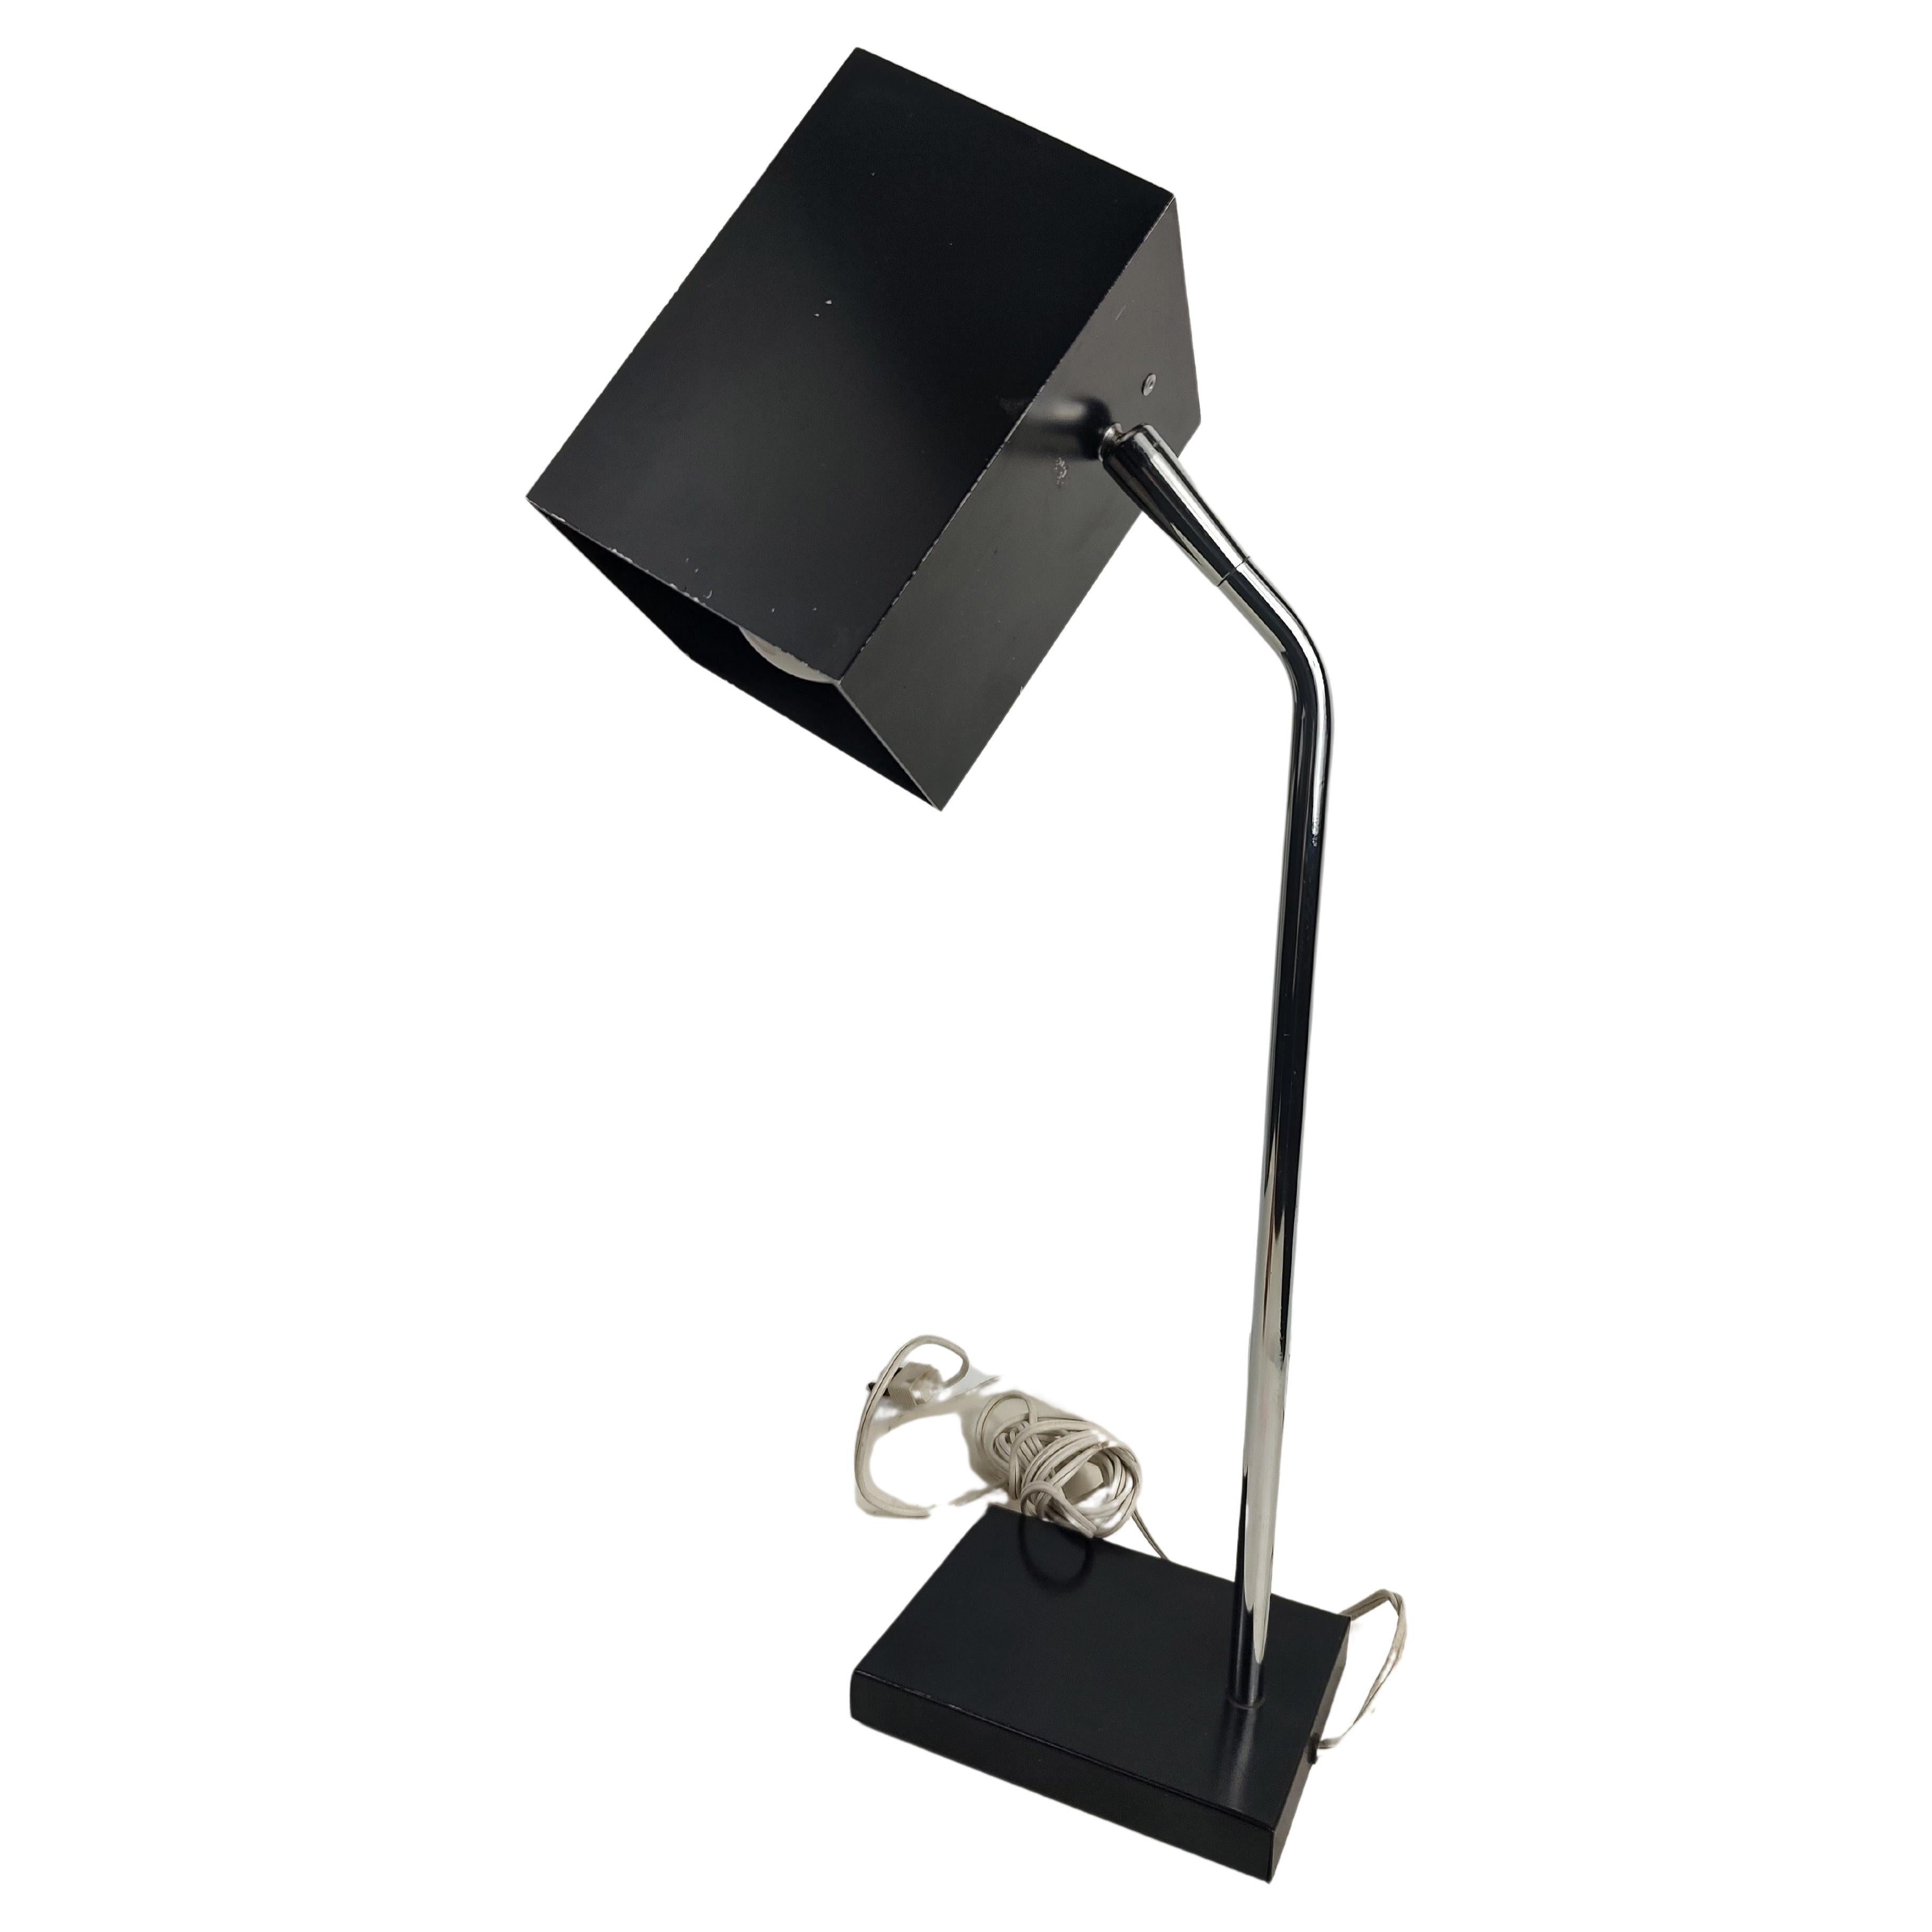 Simple elegant and so functional. Fully adjustable desk lamp by Robert Sonneman with a weighted base for stability. The Cube lamp in black with a chrome shaft in excellent vintage condition with minimal wear.